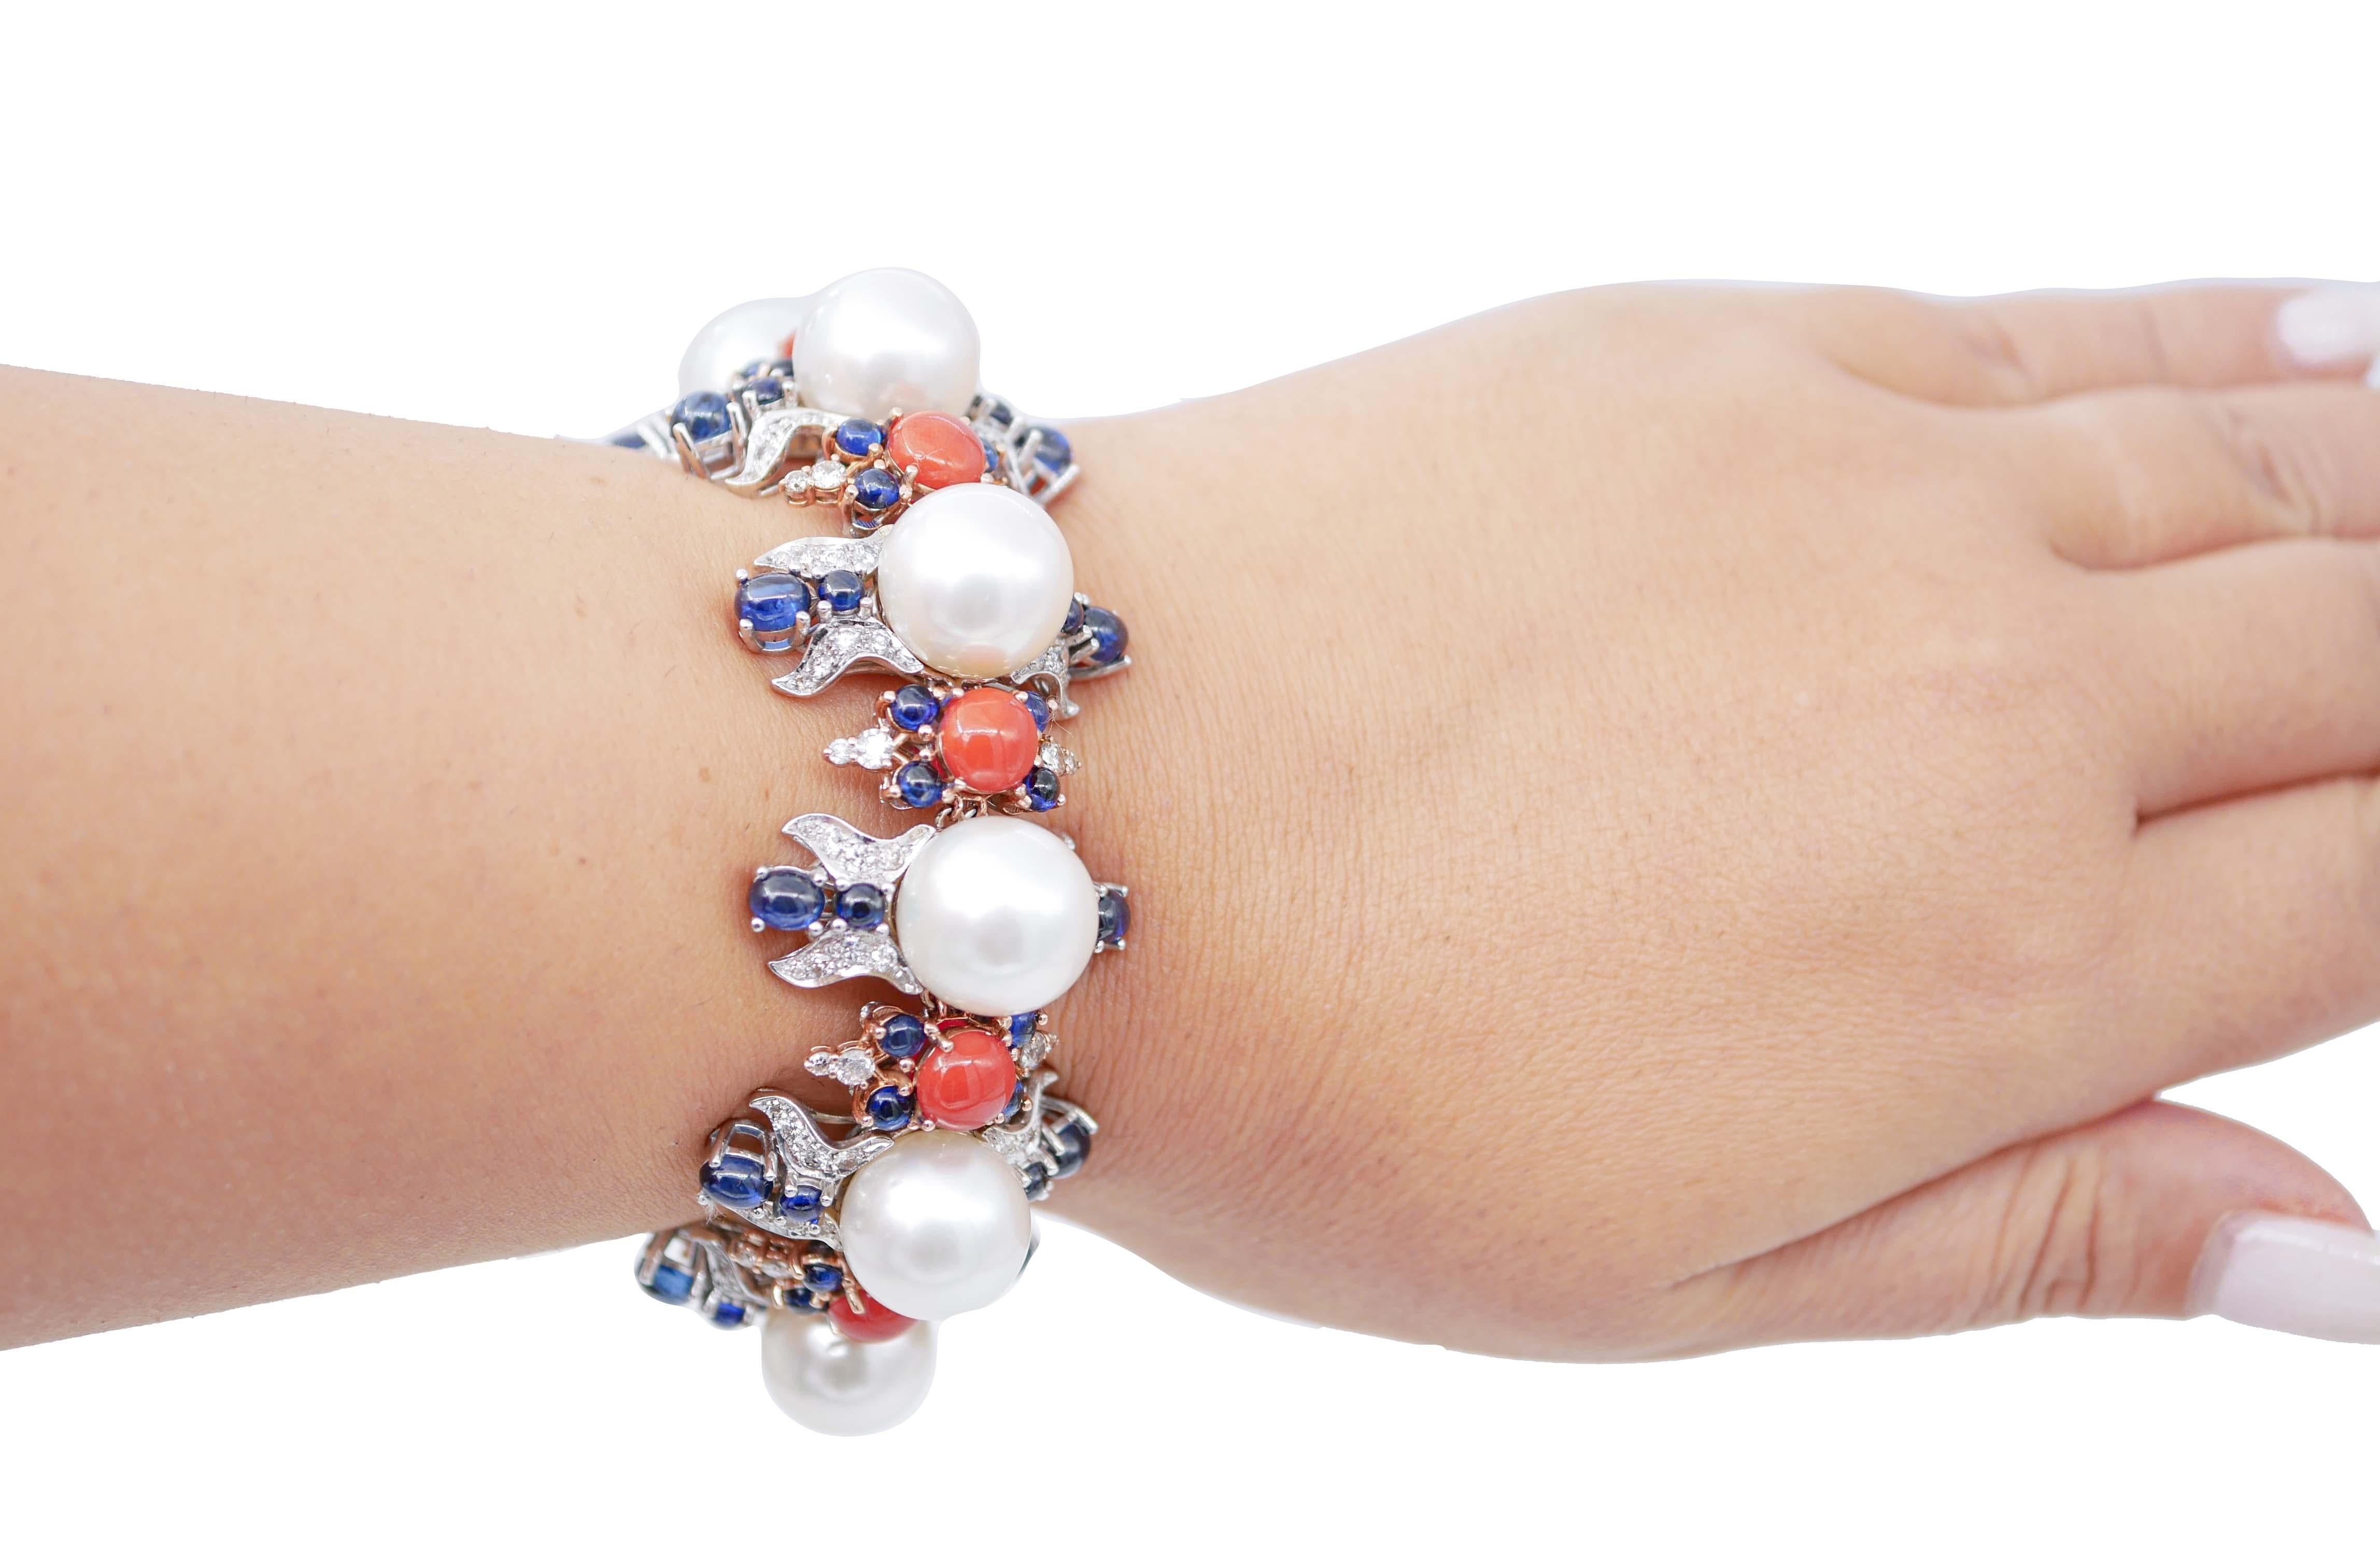 Mixed Cut South-Sea Pearls, Coral, Sapphires, Diamonds, 14 Karat White and Rose Gold Bracelet.